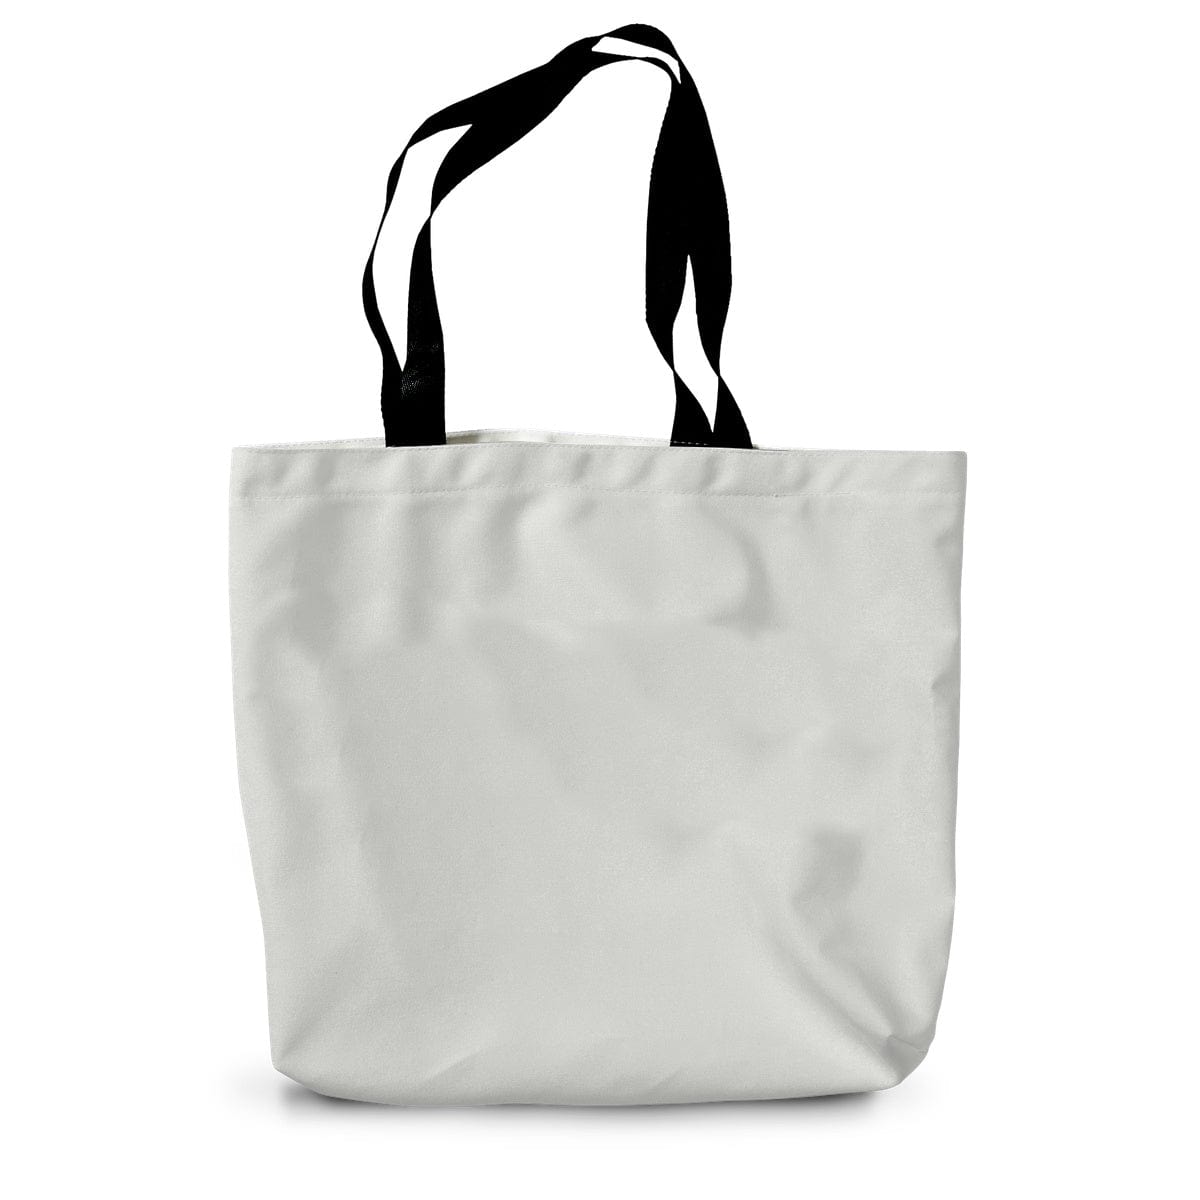 Prodigi Tote 14"x18.5" Hidden Meaning Canvas Tote Bag